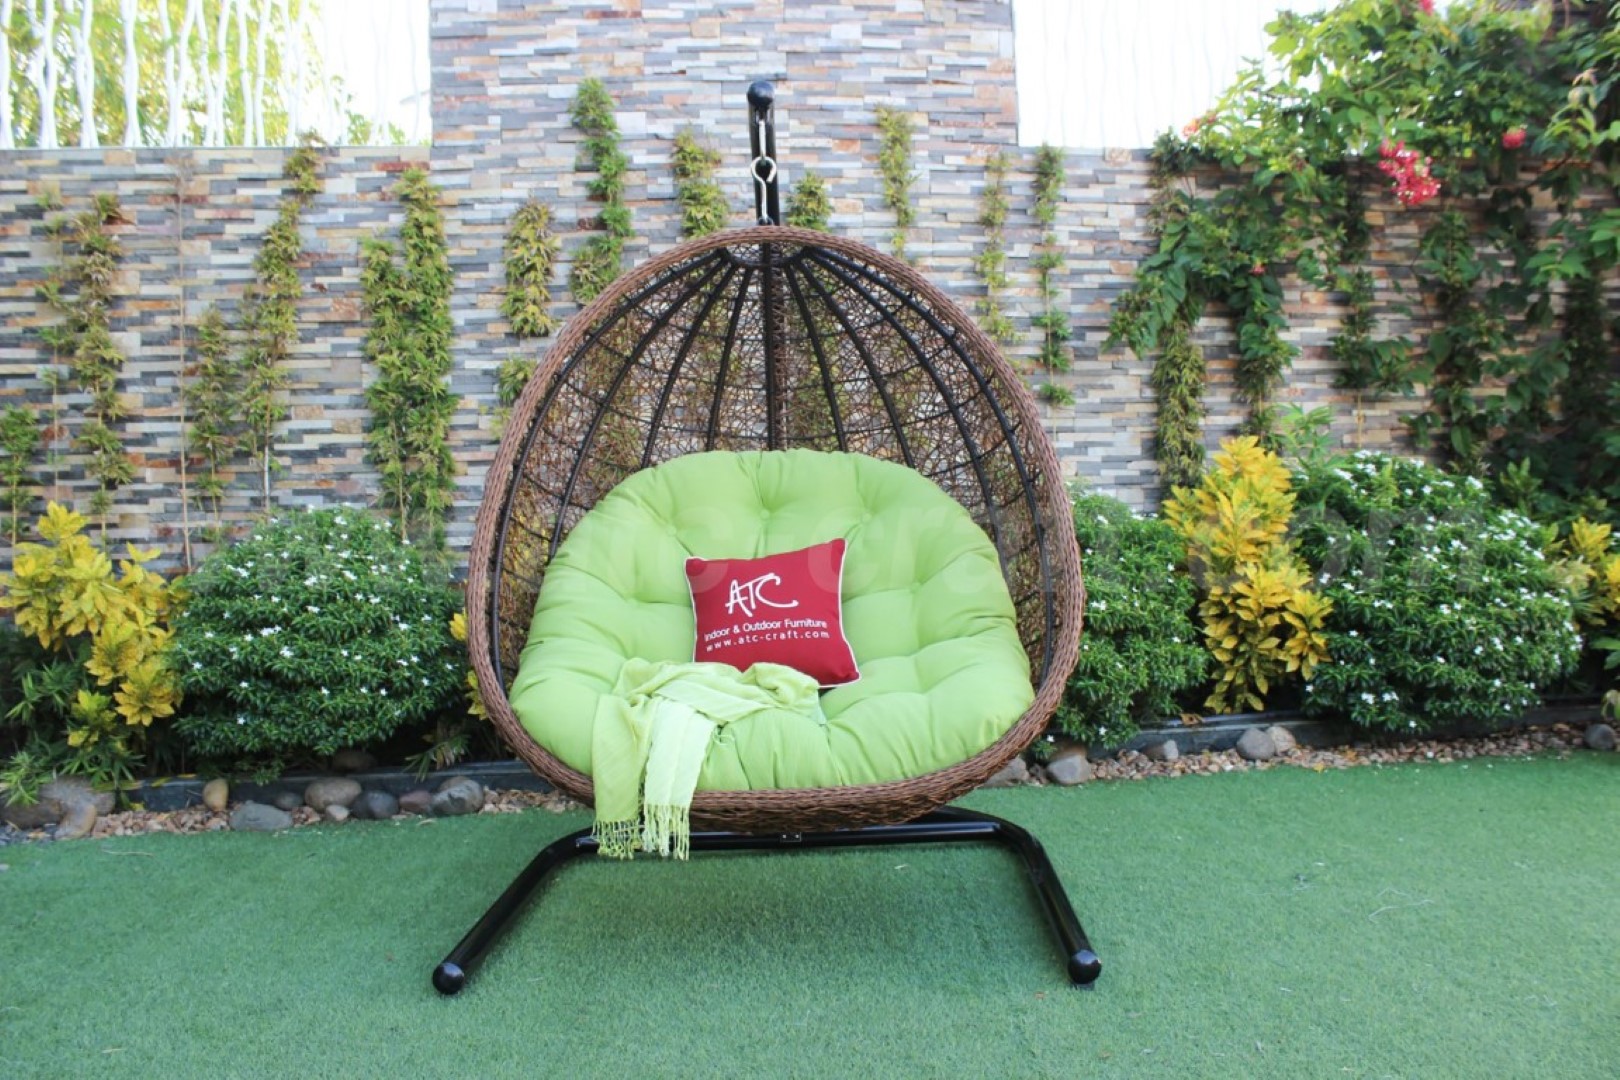 Wicker shaped nest swing chair for your garden RAHM-027 | ATC Furniture